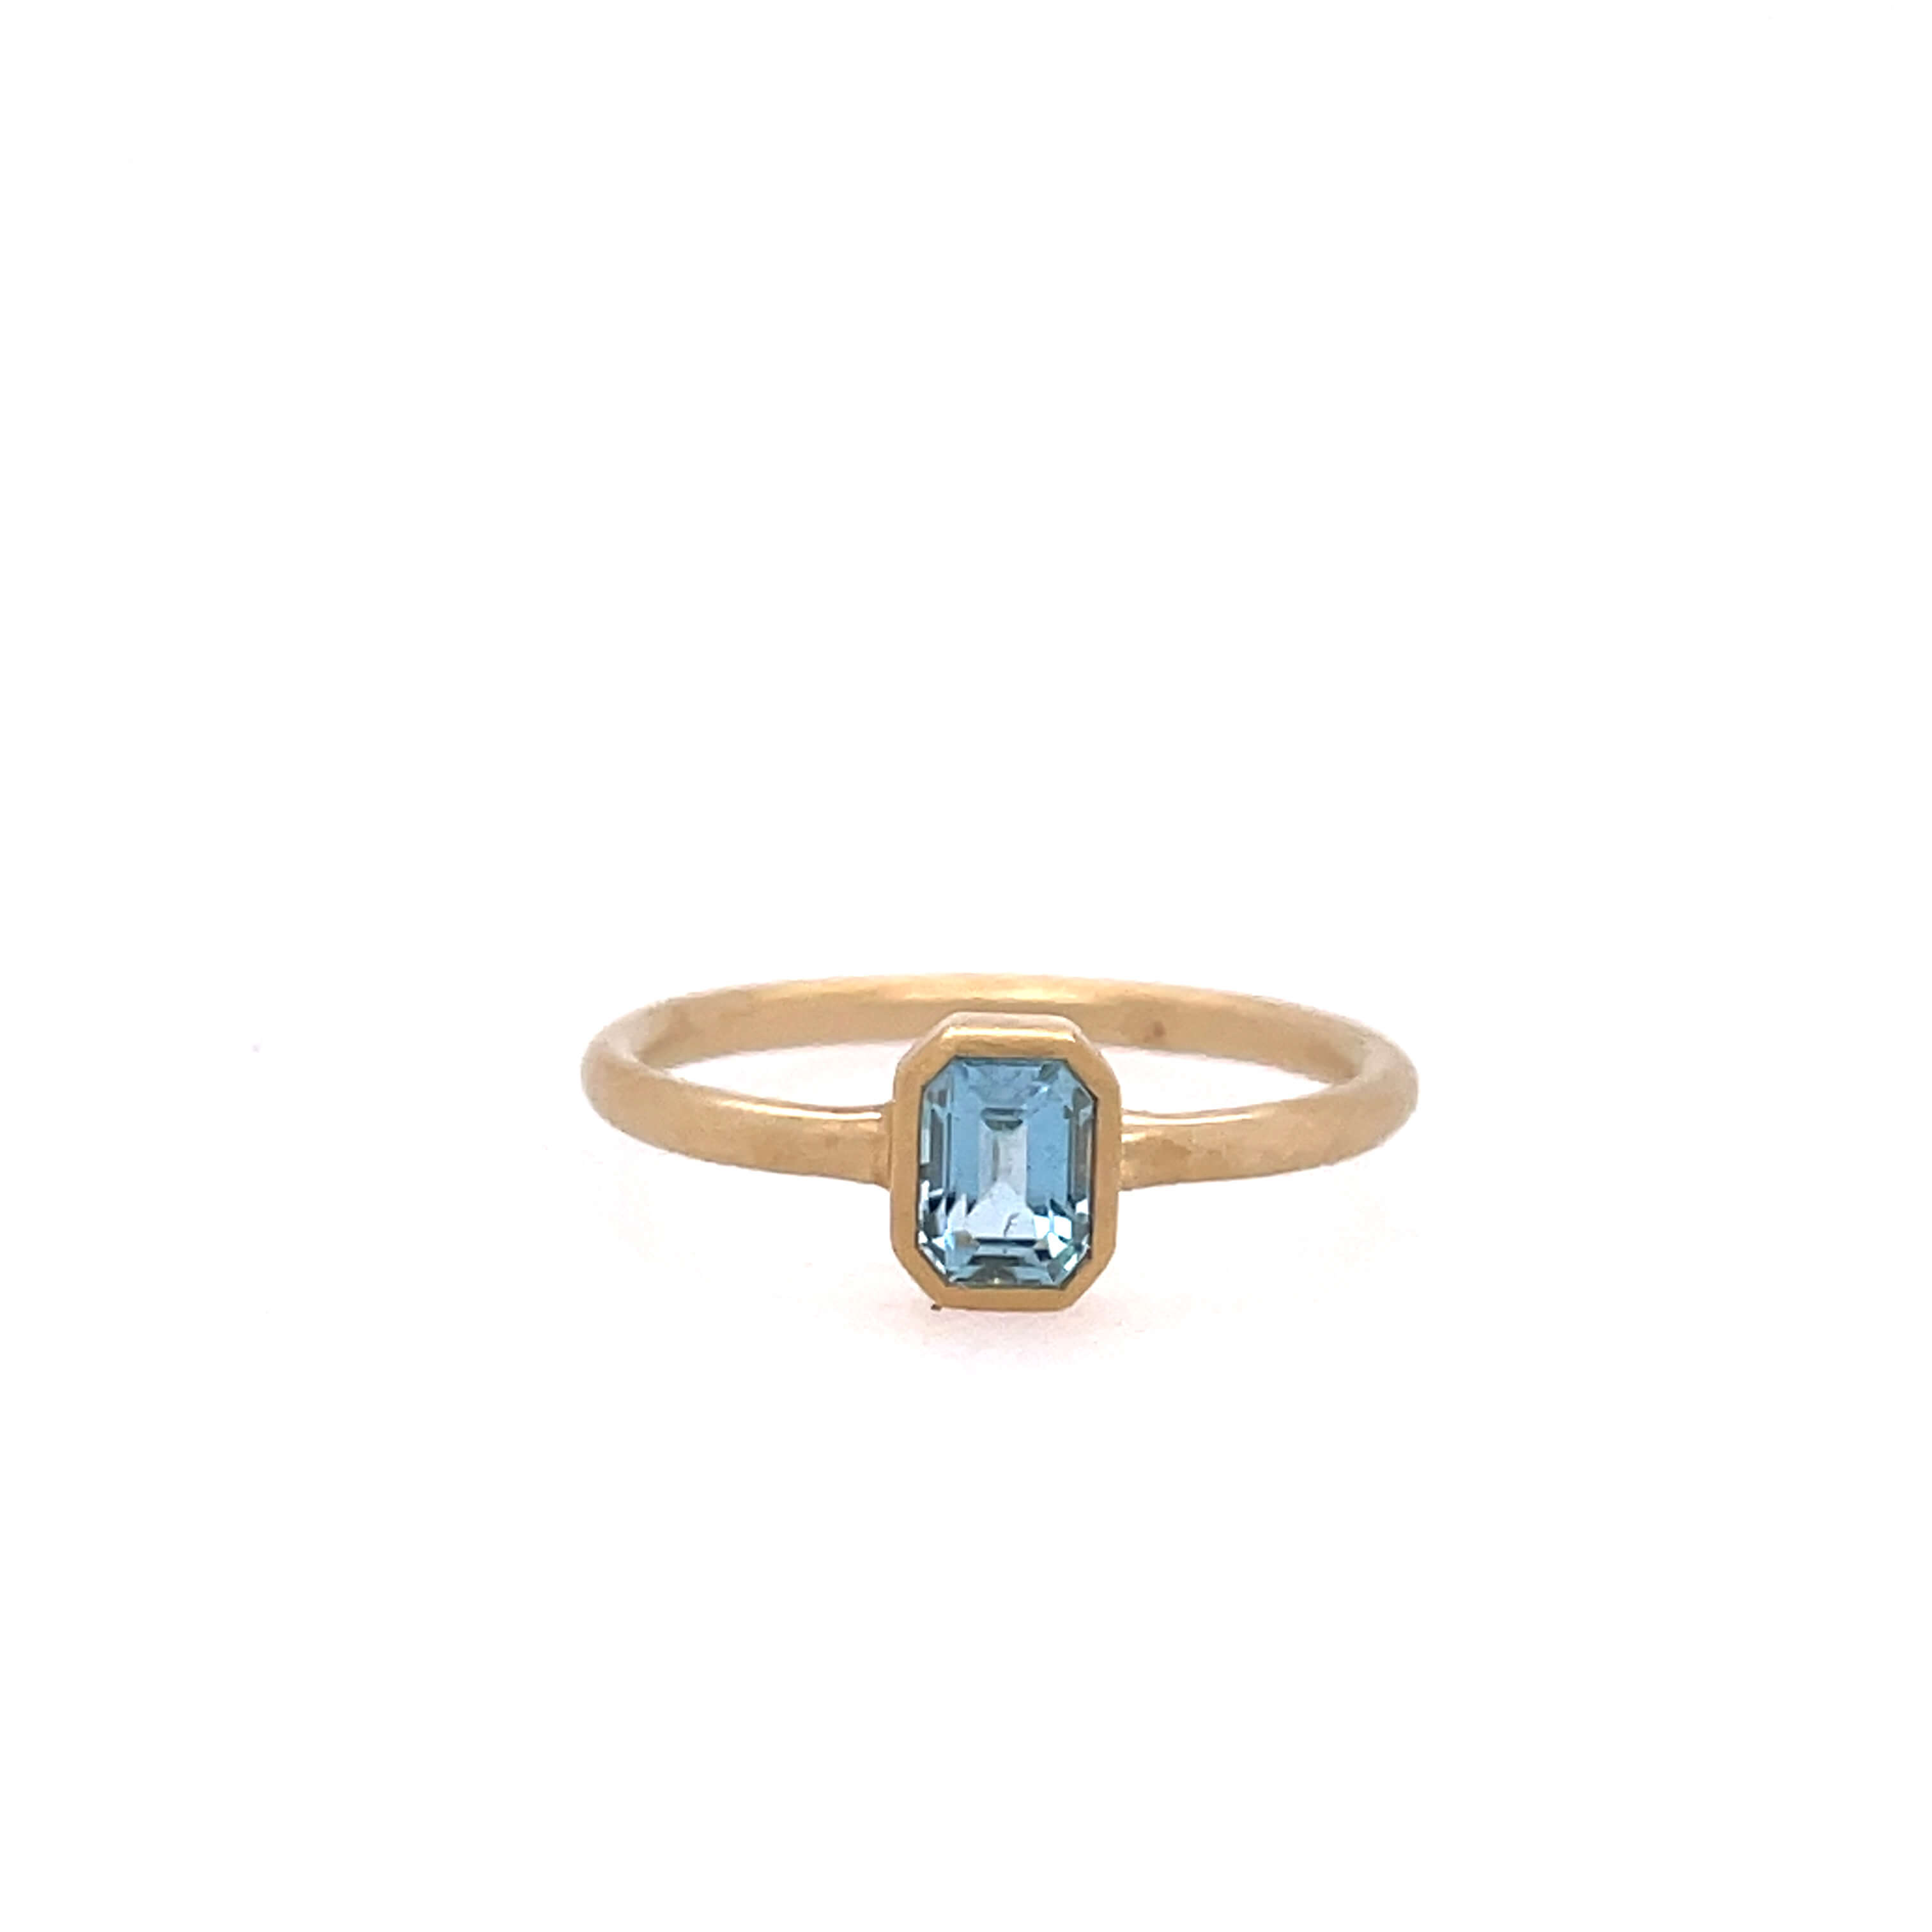 One yellow gold ring with a plain band and a bezel set emerald cut gemtone in the center, set against a white background.